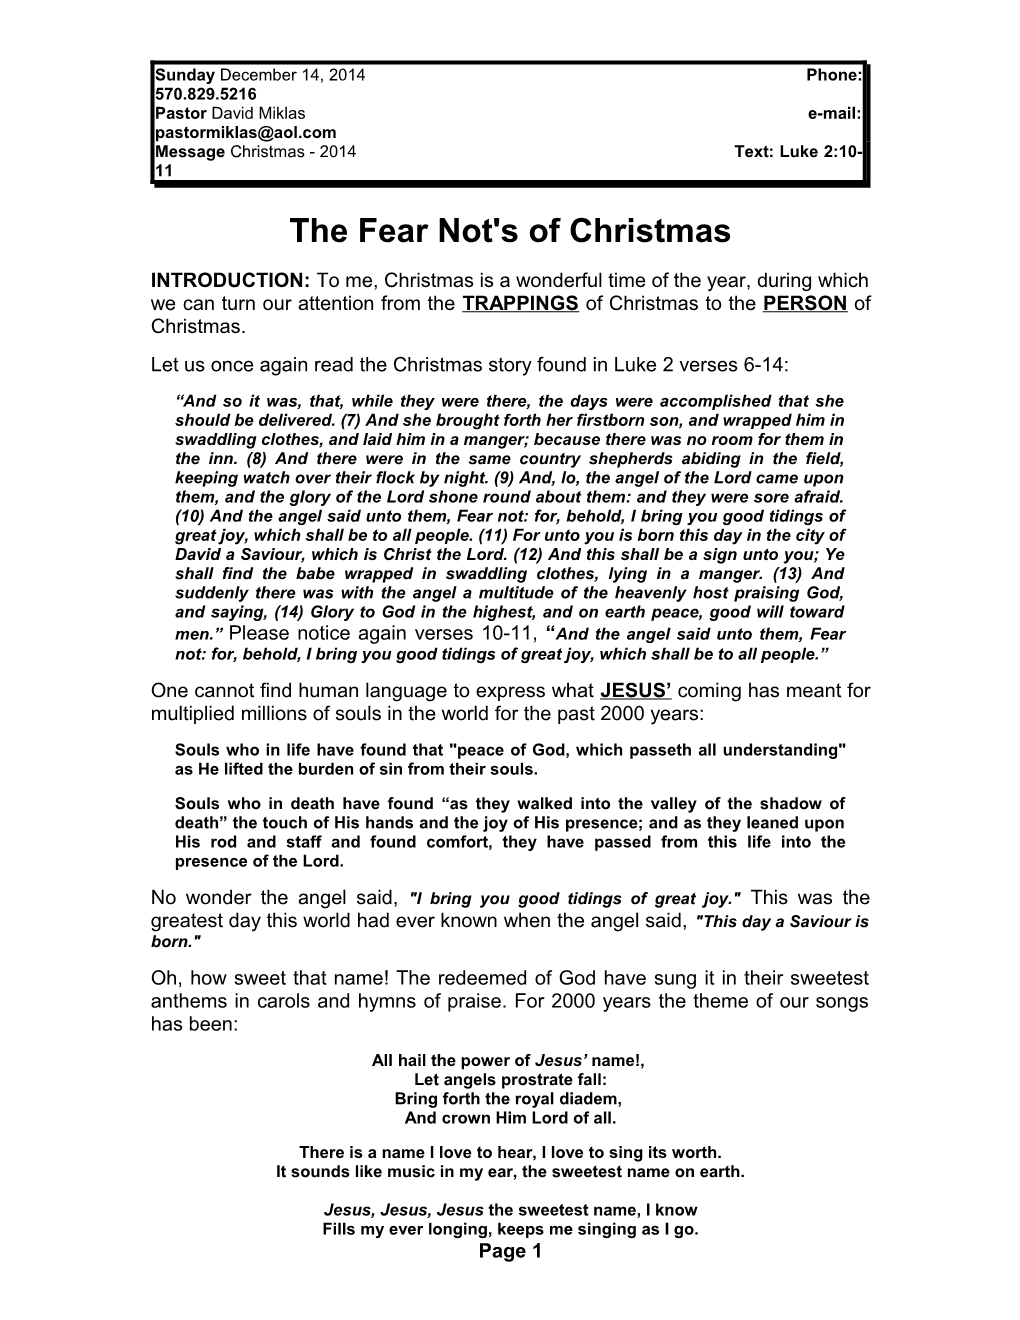 The Fear Not's of Christmas